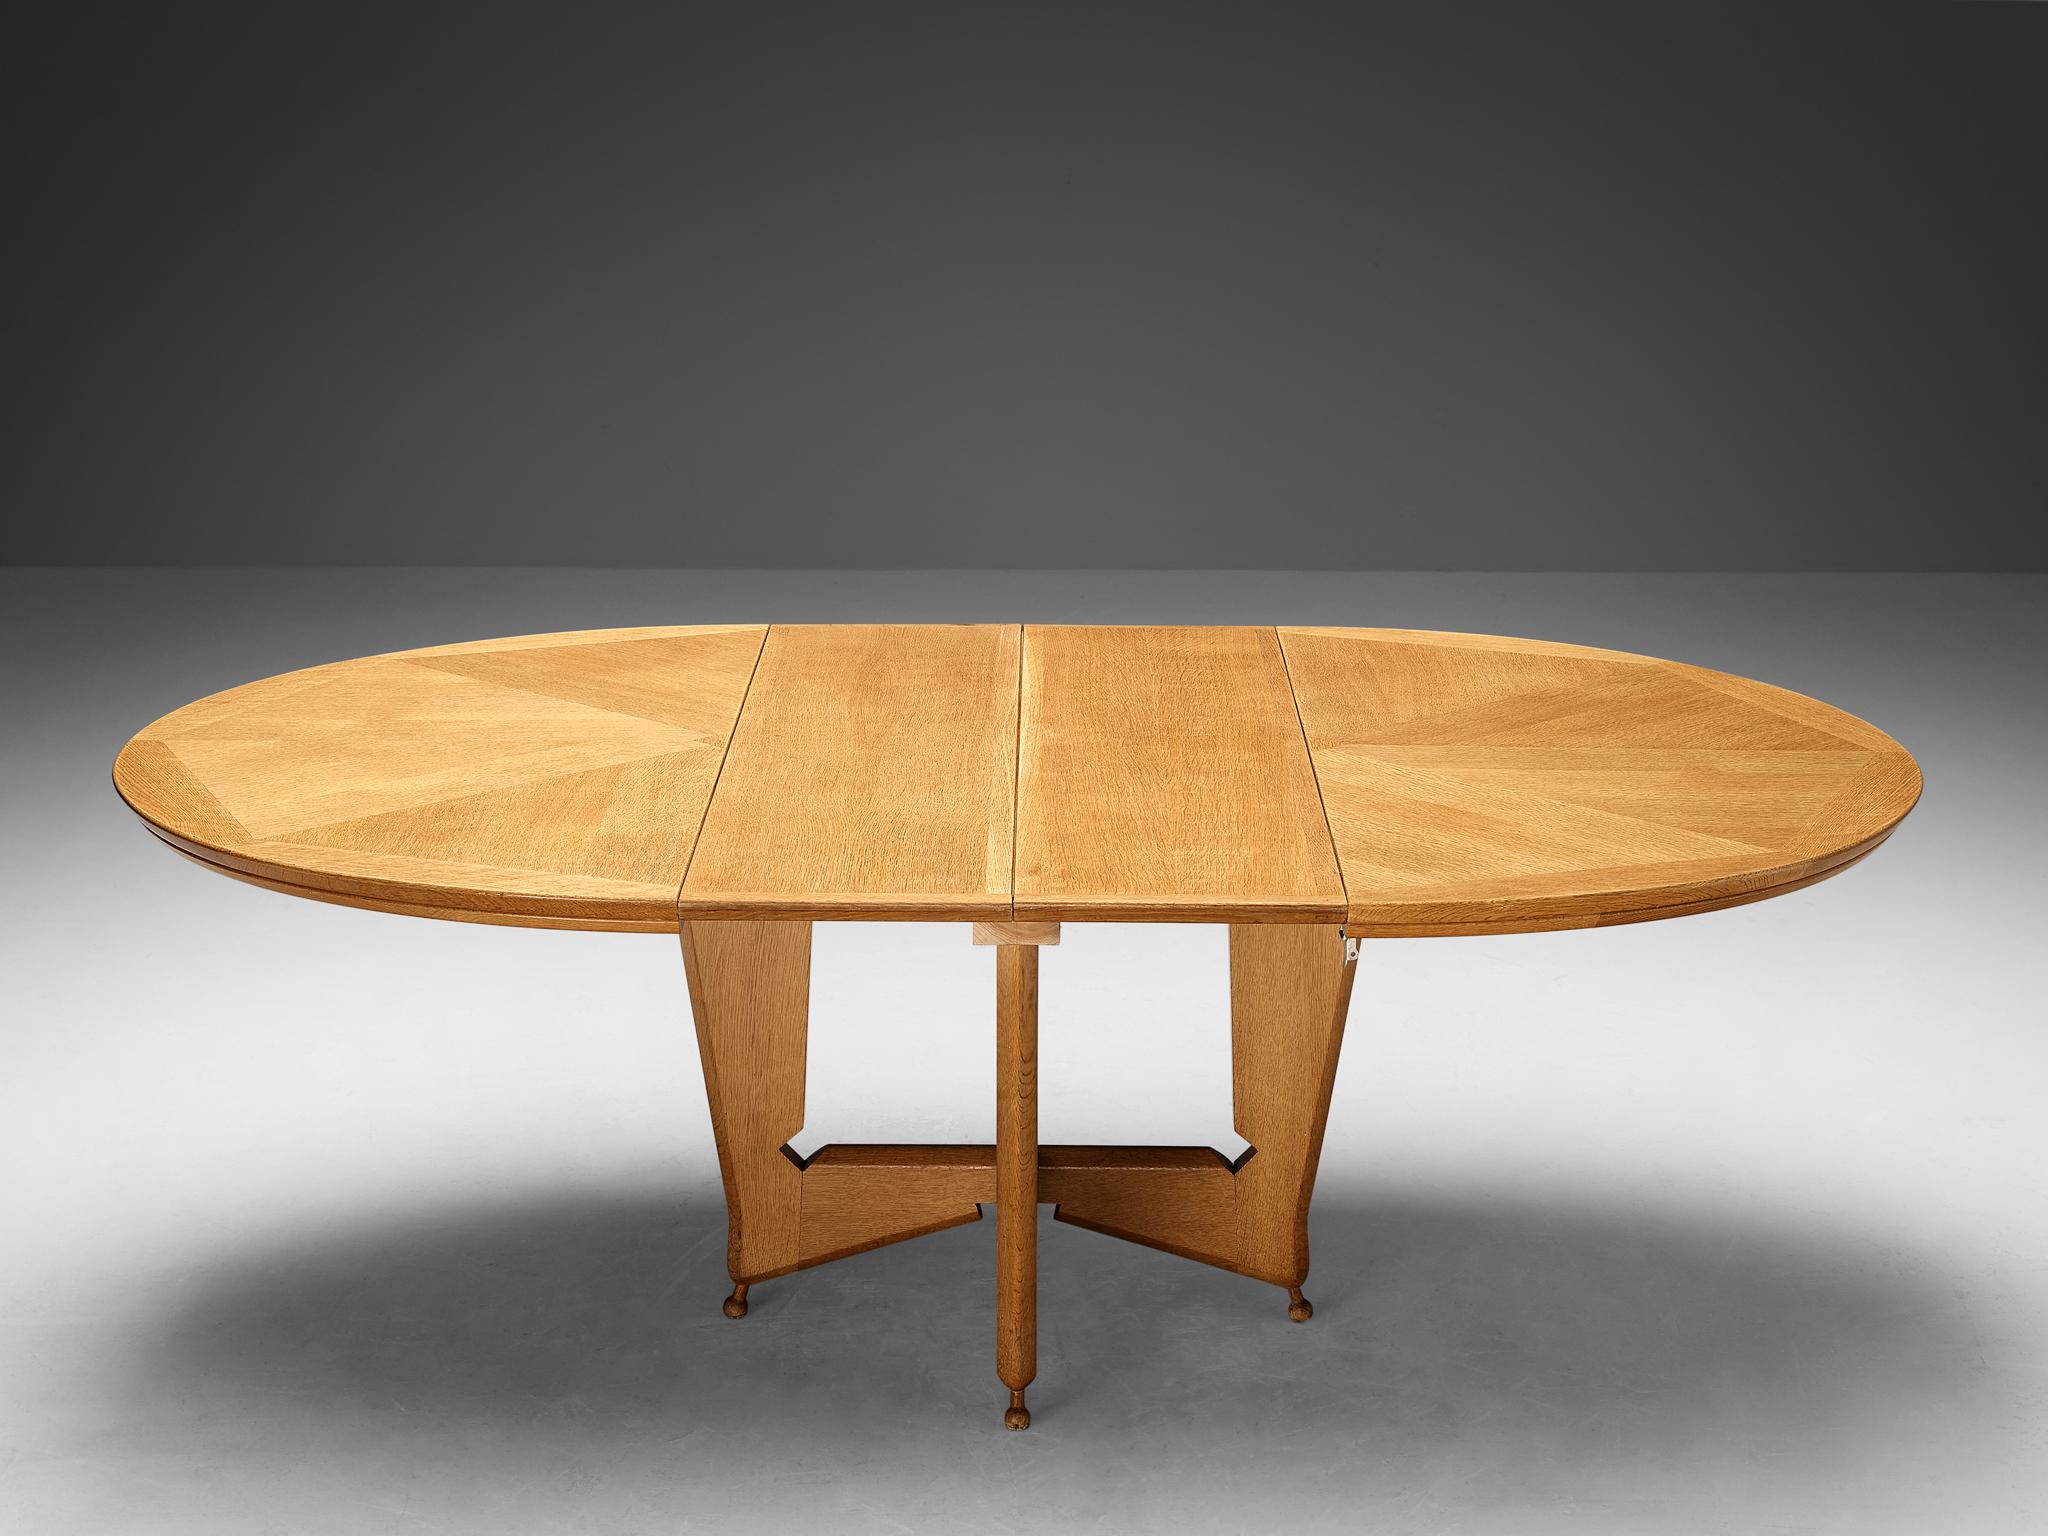 Guillerme et Chambron for Votre Maison, dining table model 'Victorine', oak, France, 1960s

This wonderful table shows great craftsmanship and a strong appearance, that clearly characterizes the work of Guillerme & Chambron. The top of the table has